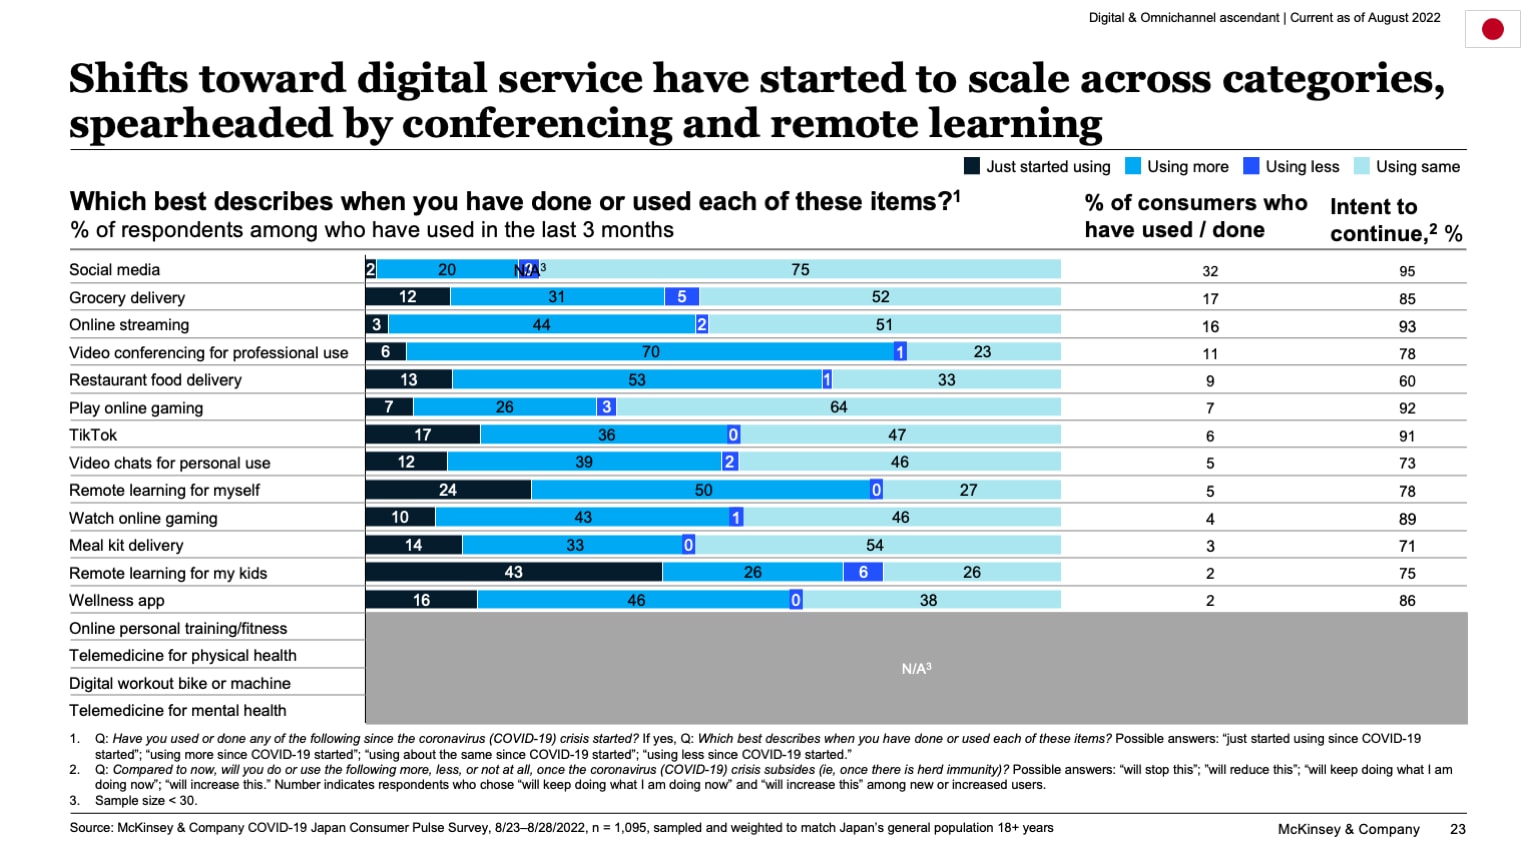 Shifts toward digital service have started to scale across categories, spearheaded by conferencing and remote learning